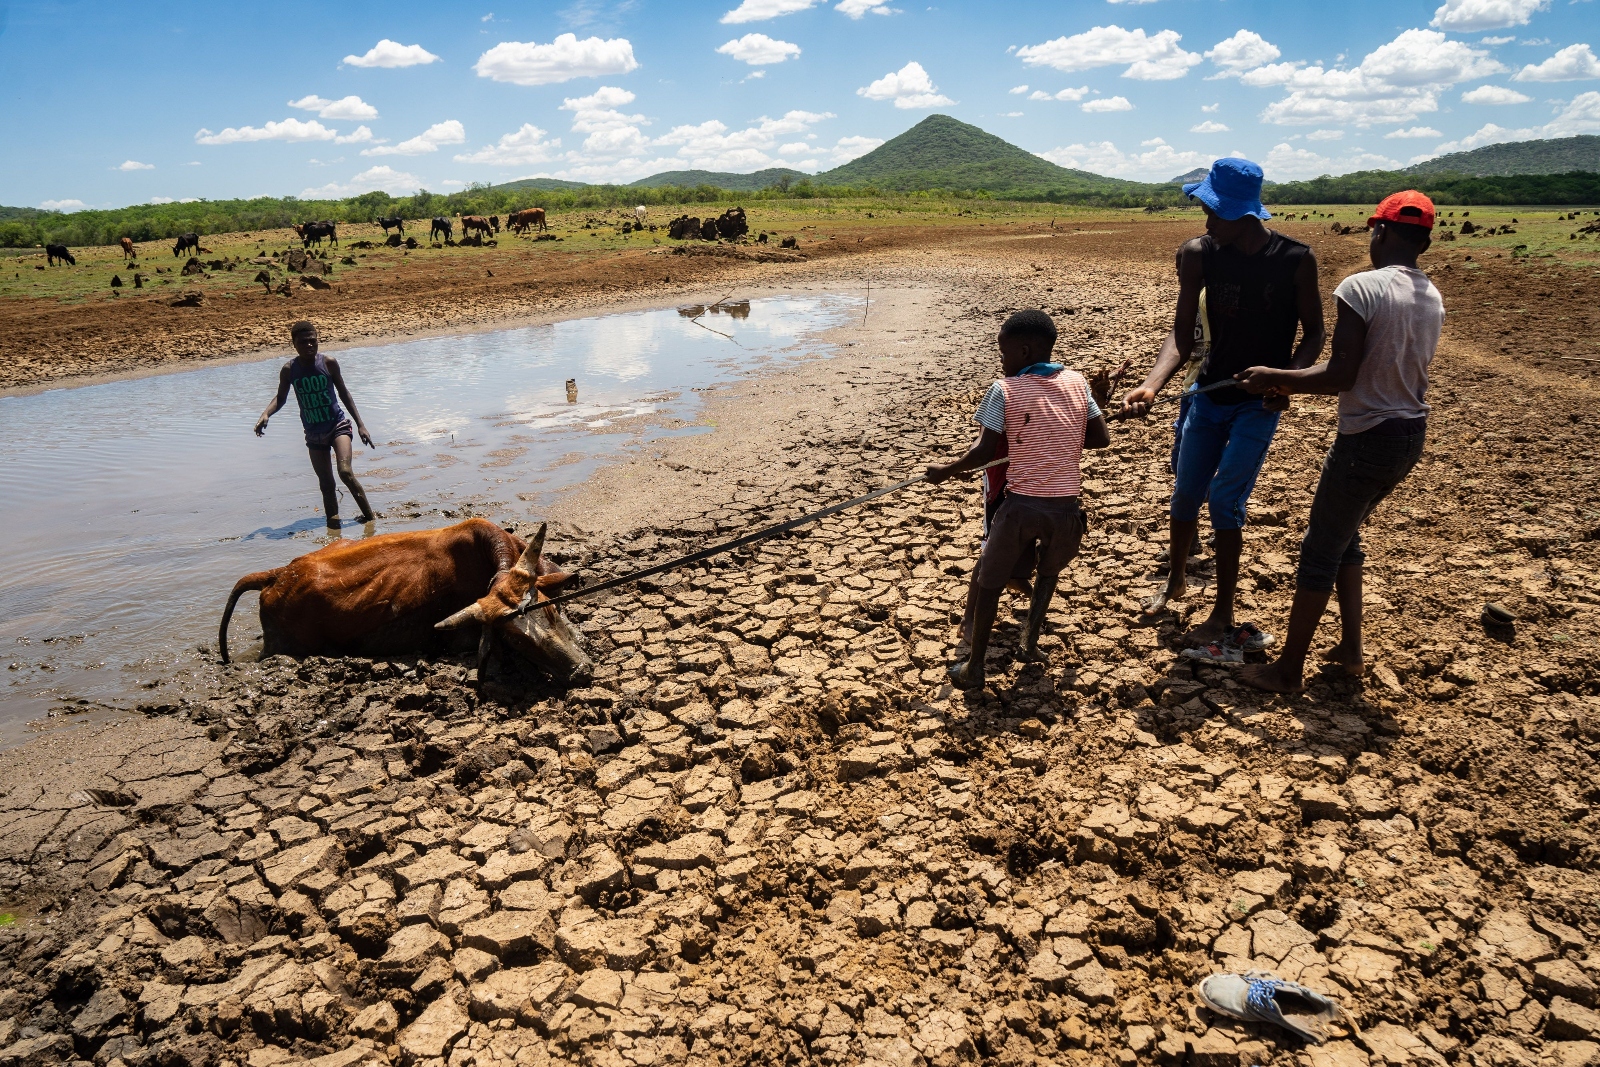 Herd boys pull out an ox stuck in the muddy waters of a drying reservoir in southern Zimbabwe. The county has declared a national emergency due to a drought caused by climate change and El Niño.